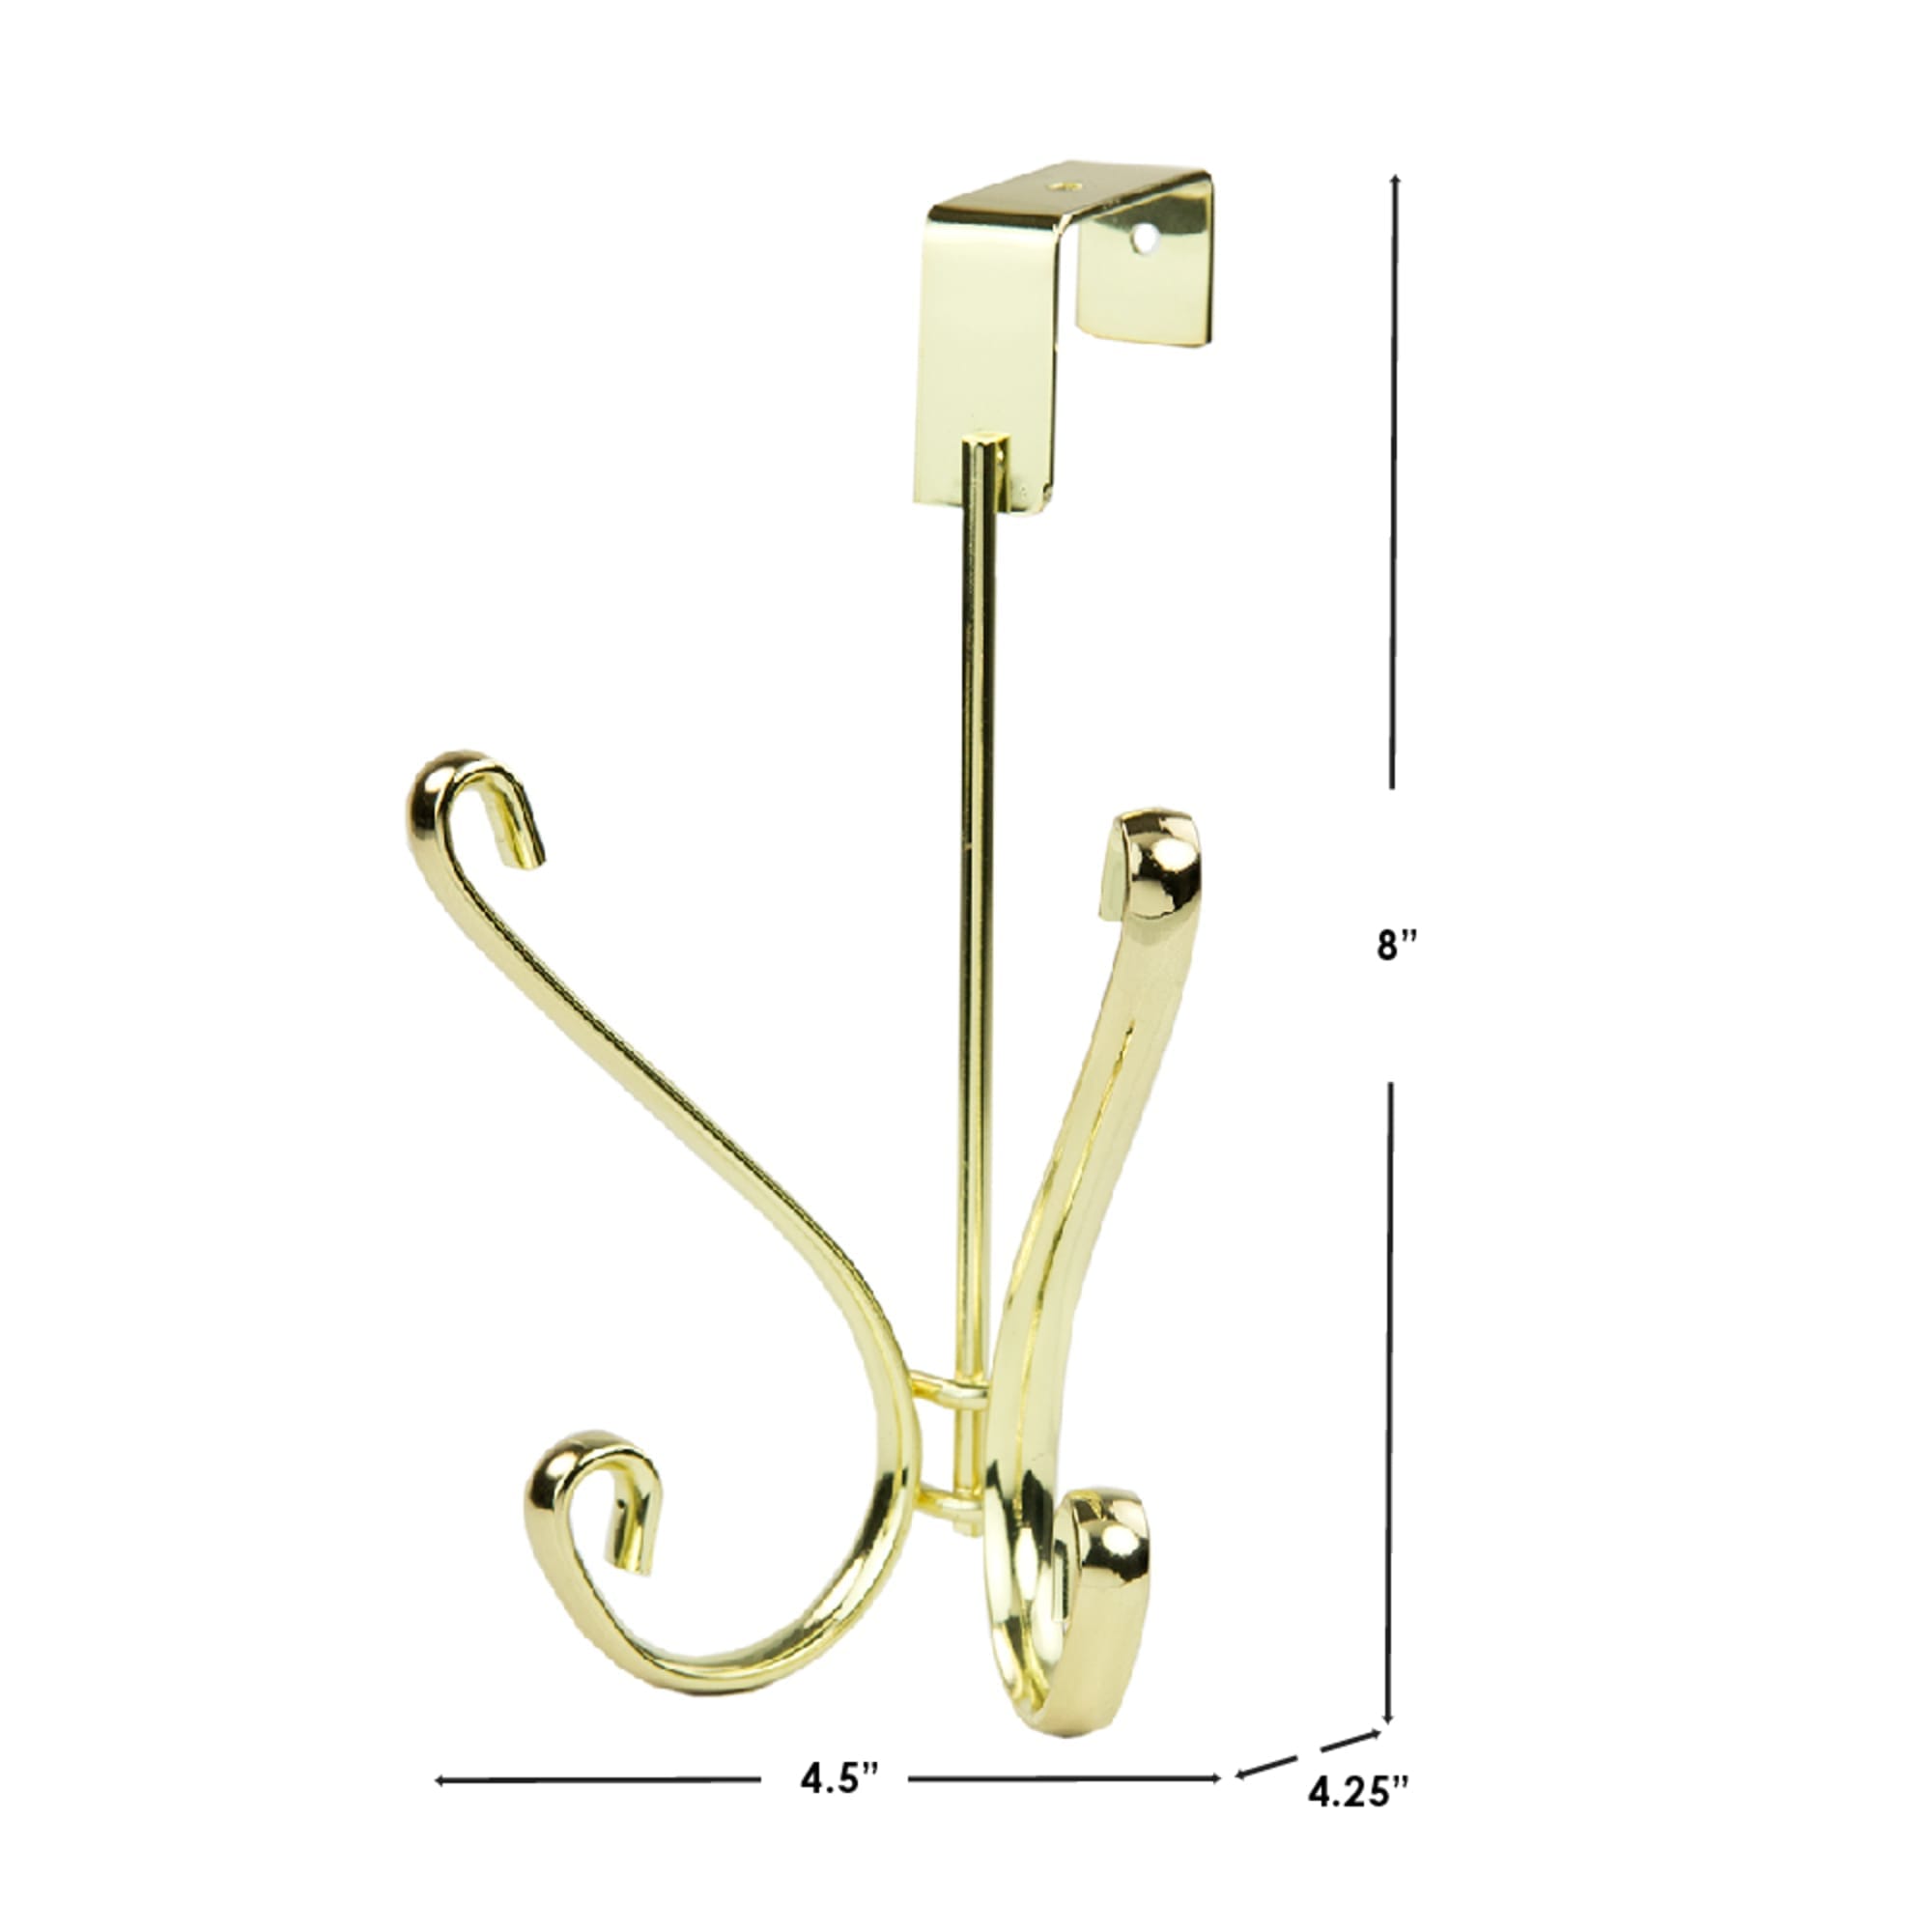 Home Basics Over the Door Double Hook, Gold $3.00 EACH, CASE PACK OF 12